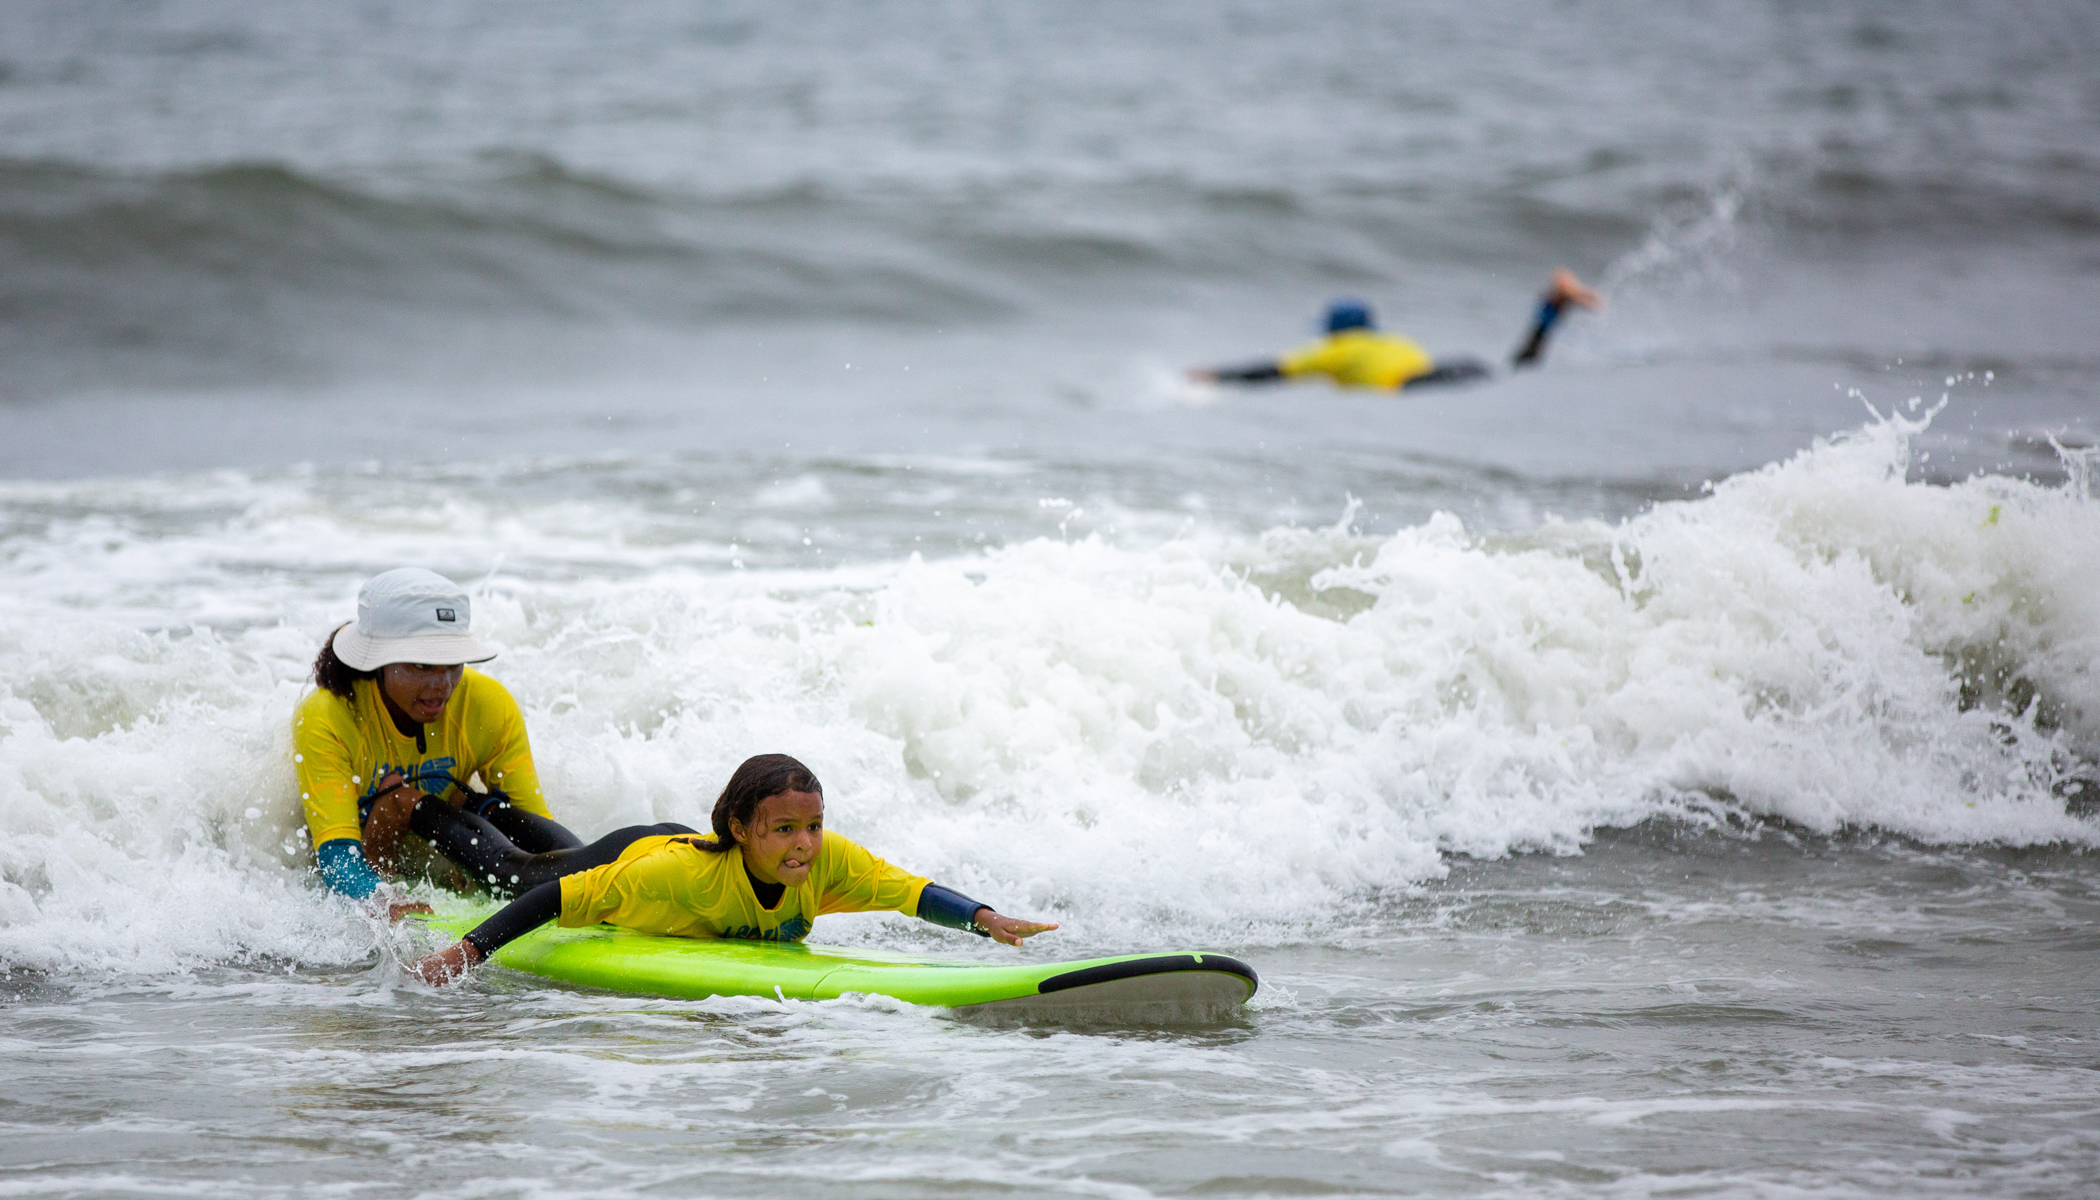 Empowering the Youth through Surfing